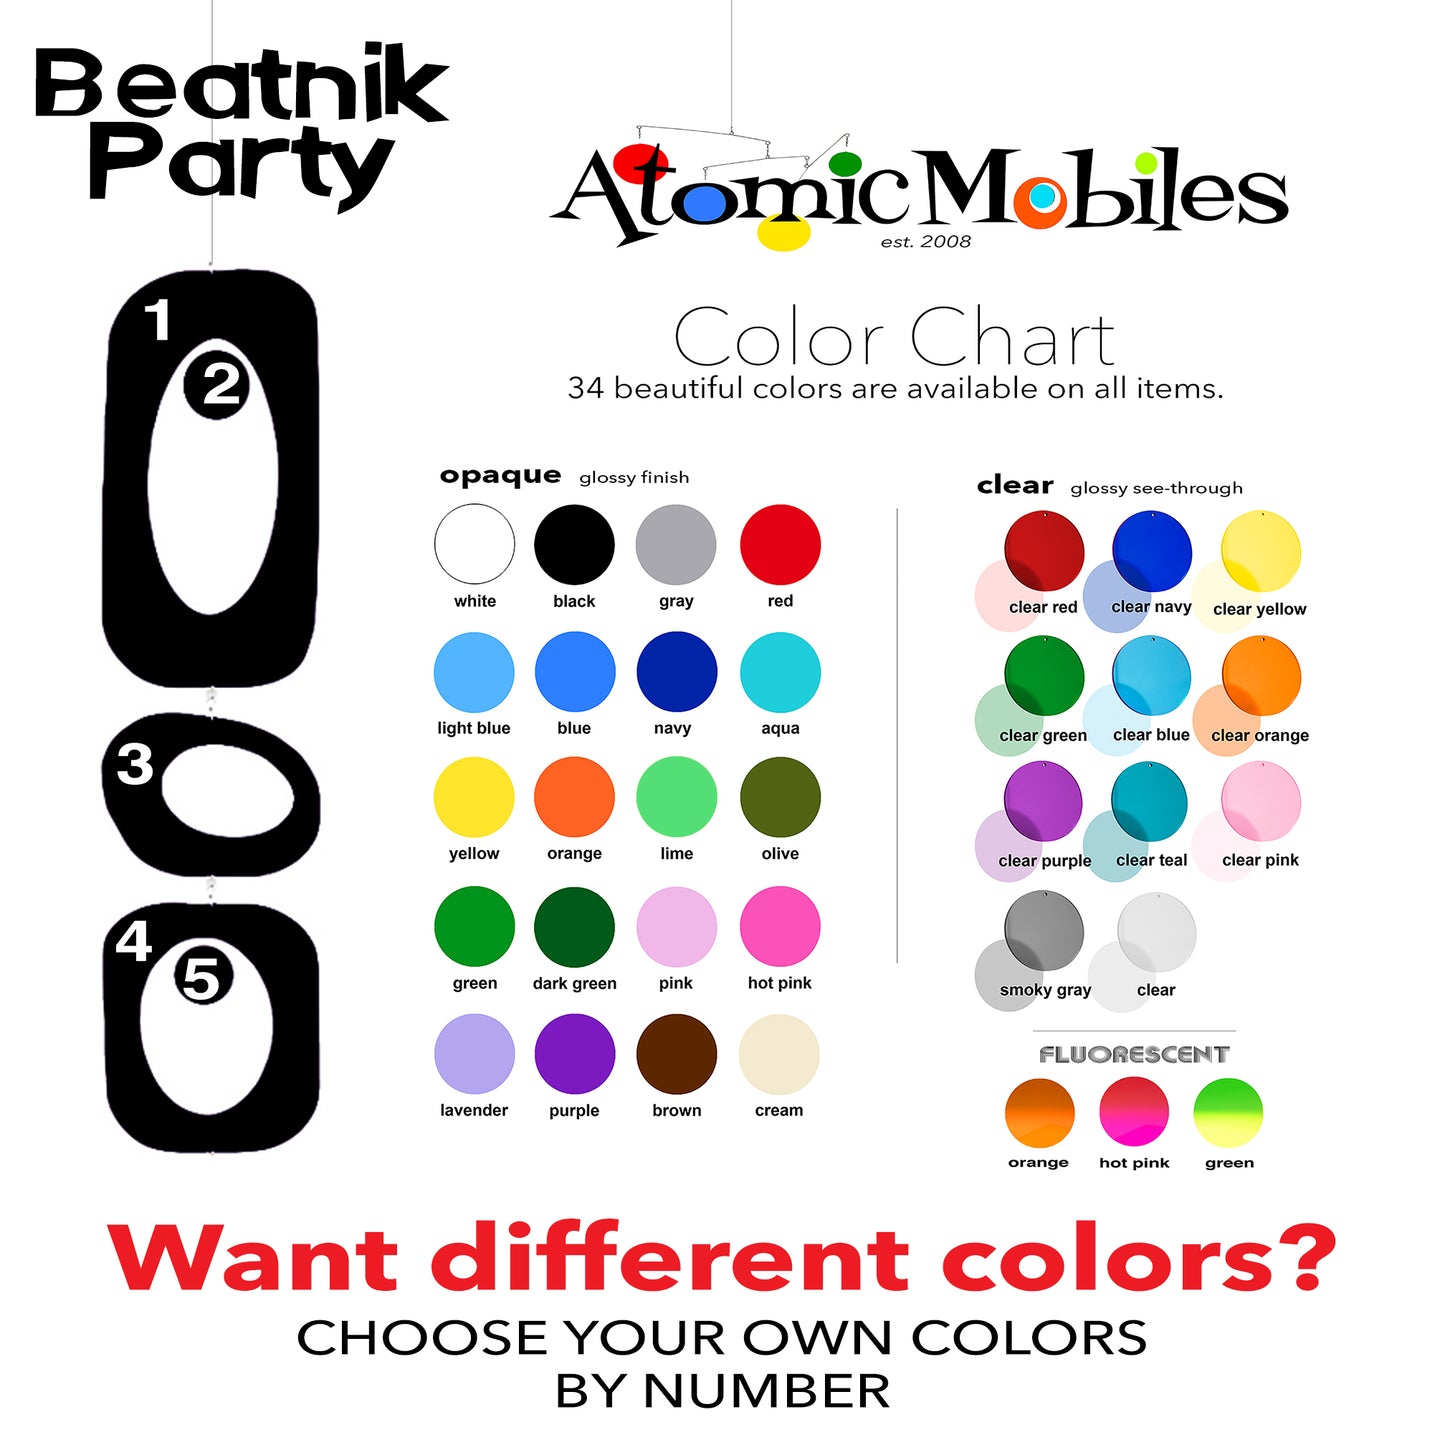 Color Chart for Beatnik Party DIY Art Mobile inspired by mid century modern retro style Kit by AtomicMobiles.com